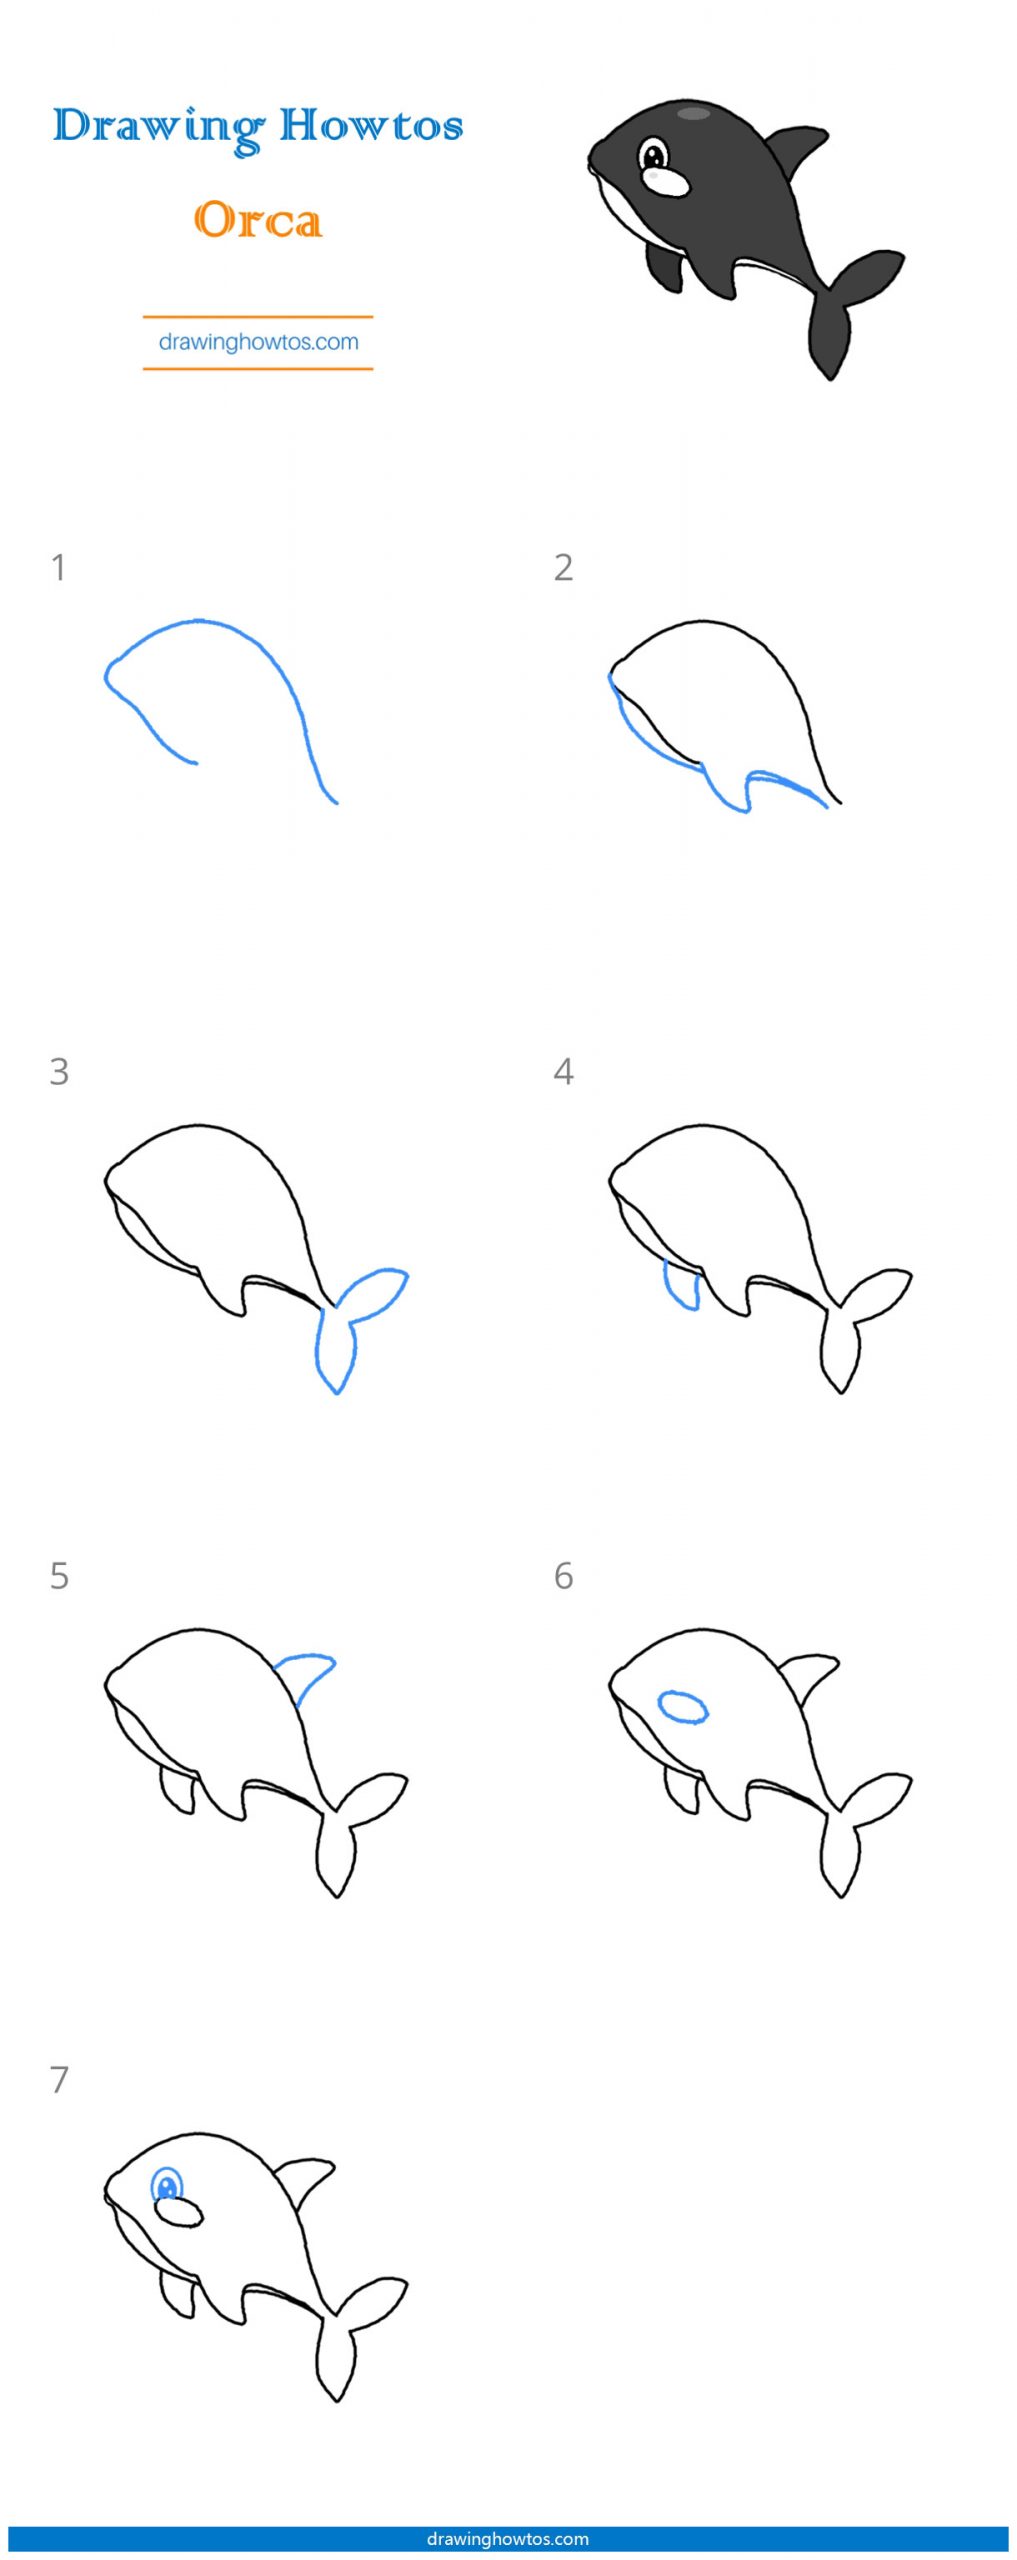 How to Draw an Orca Step by Step